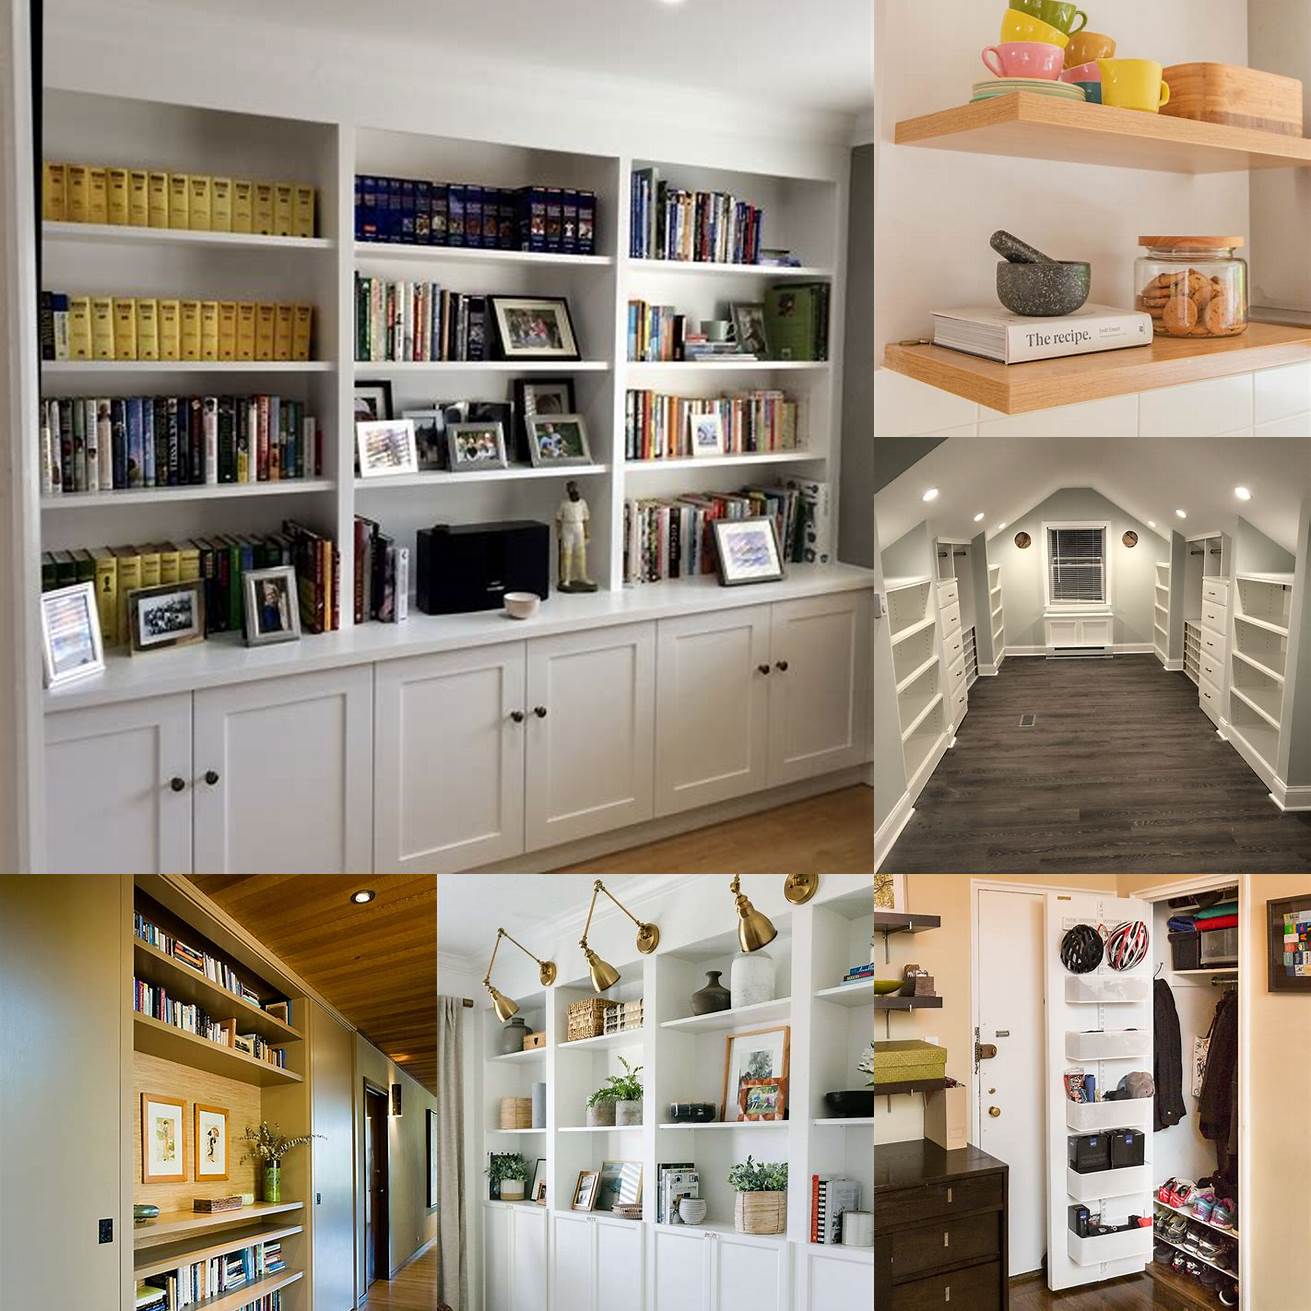 Add built-in shelving to maximize storage space